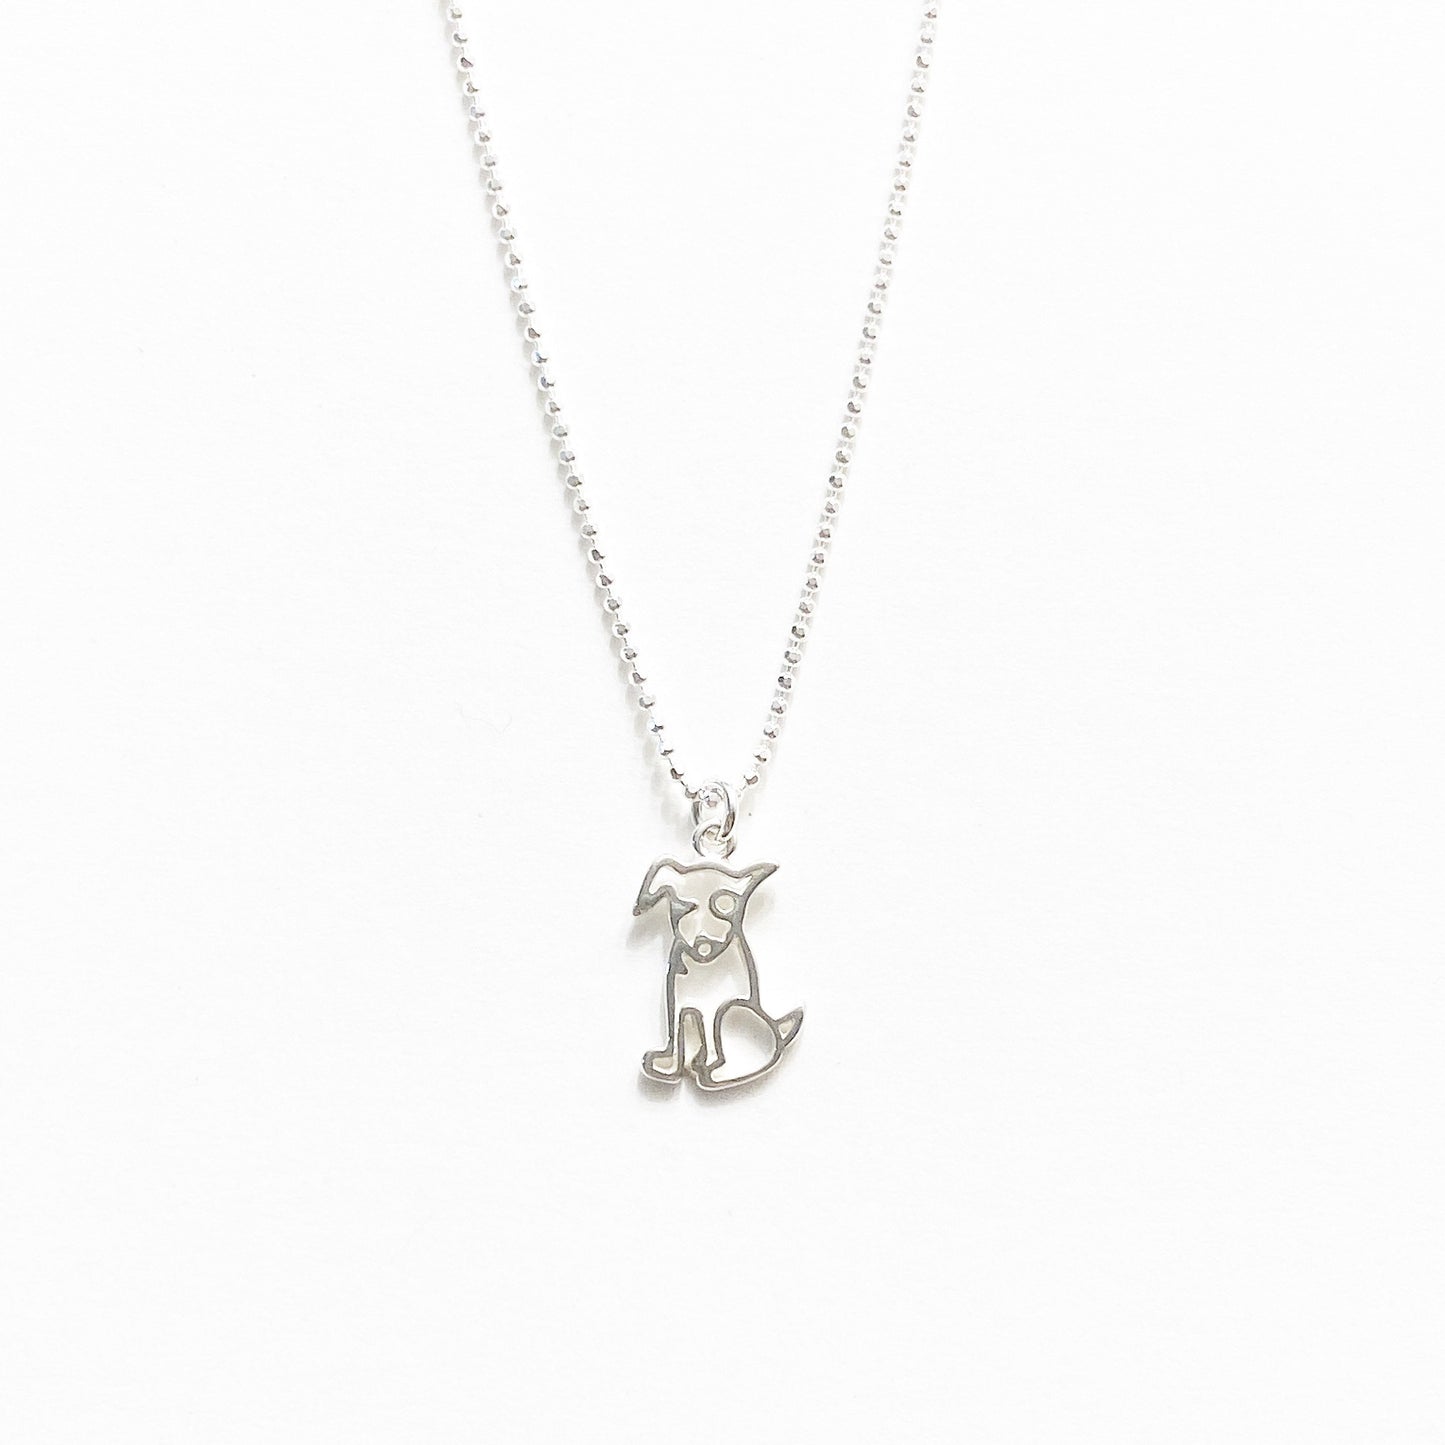 SPECIAL CAUSE: Potcake necklace (proceeds go to helpAWS animal rescue)